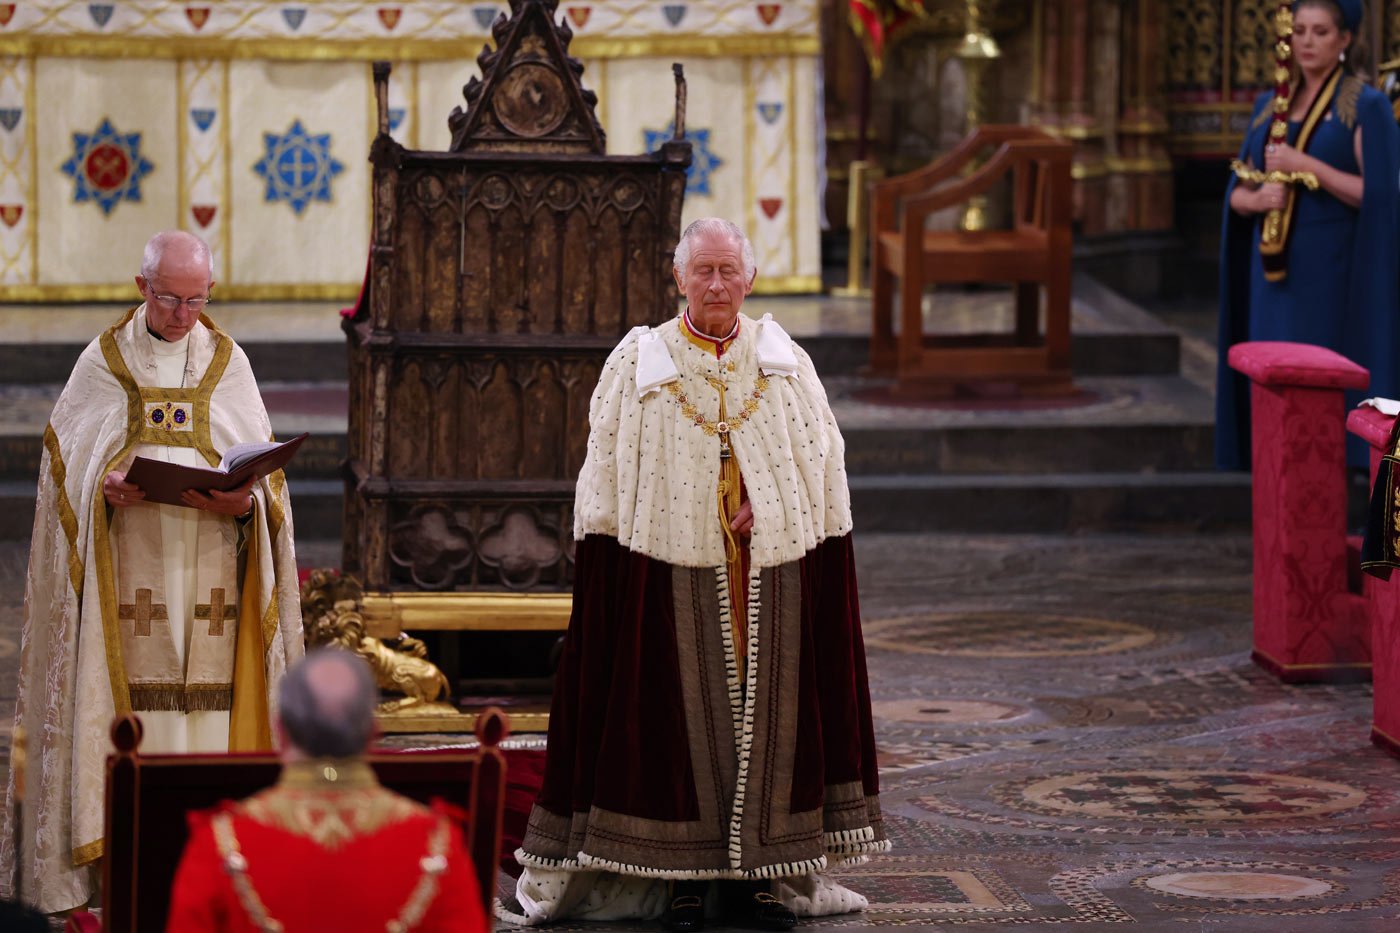 King Charles III stands while closing his eyes during the coronation ceremony